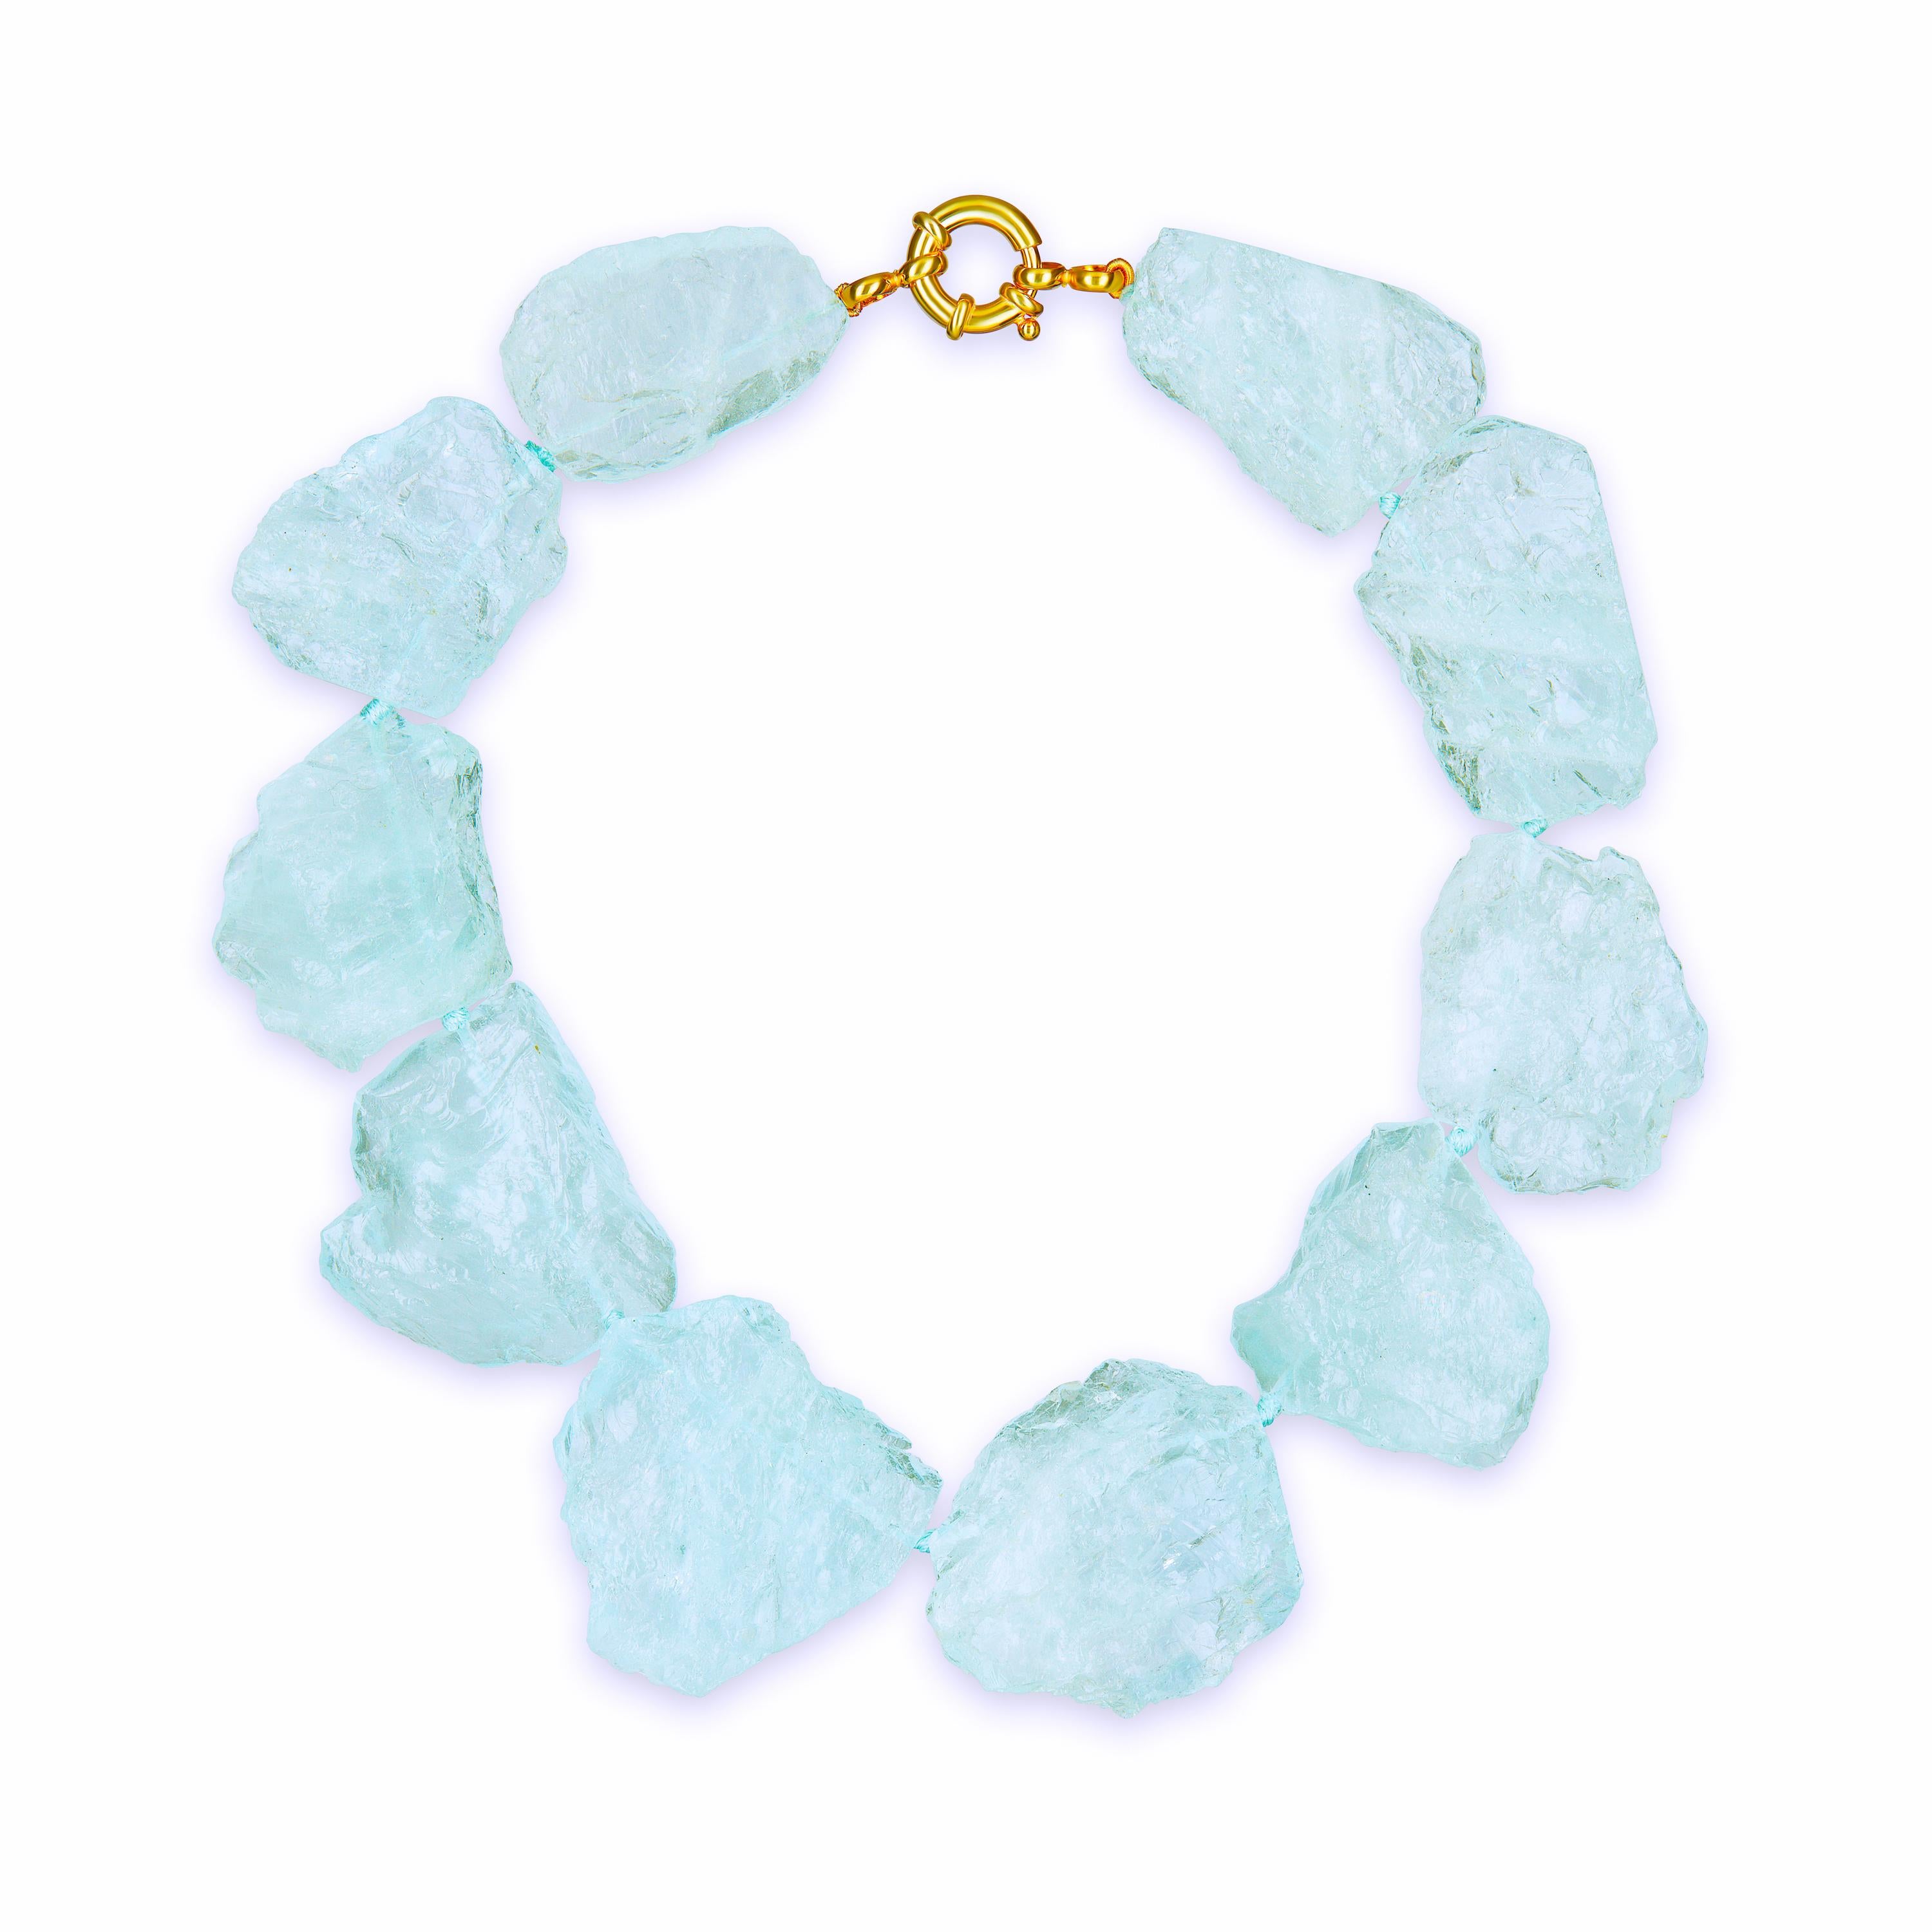 1,446.50 Carats Of Carved Aquamarine Necklace Composed of 10 approximately 
2 inch Diameter Delicate Sky Blue Brazilian Aquamarines Total Length of Necklace 18 Inches. Stunningly chic and elegant. Vermeil clasp hand pale blue silk knotted.